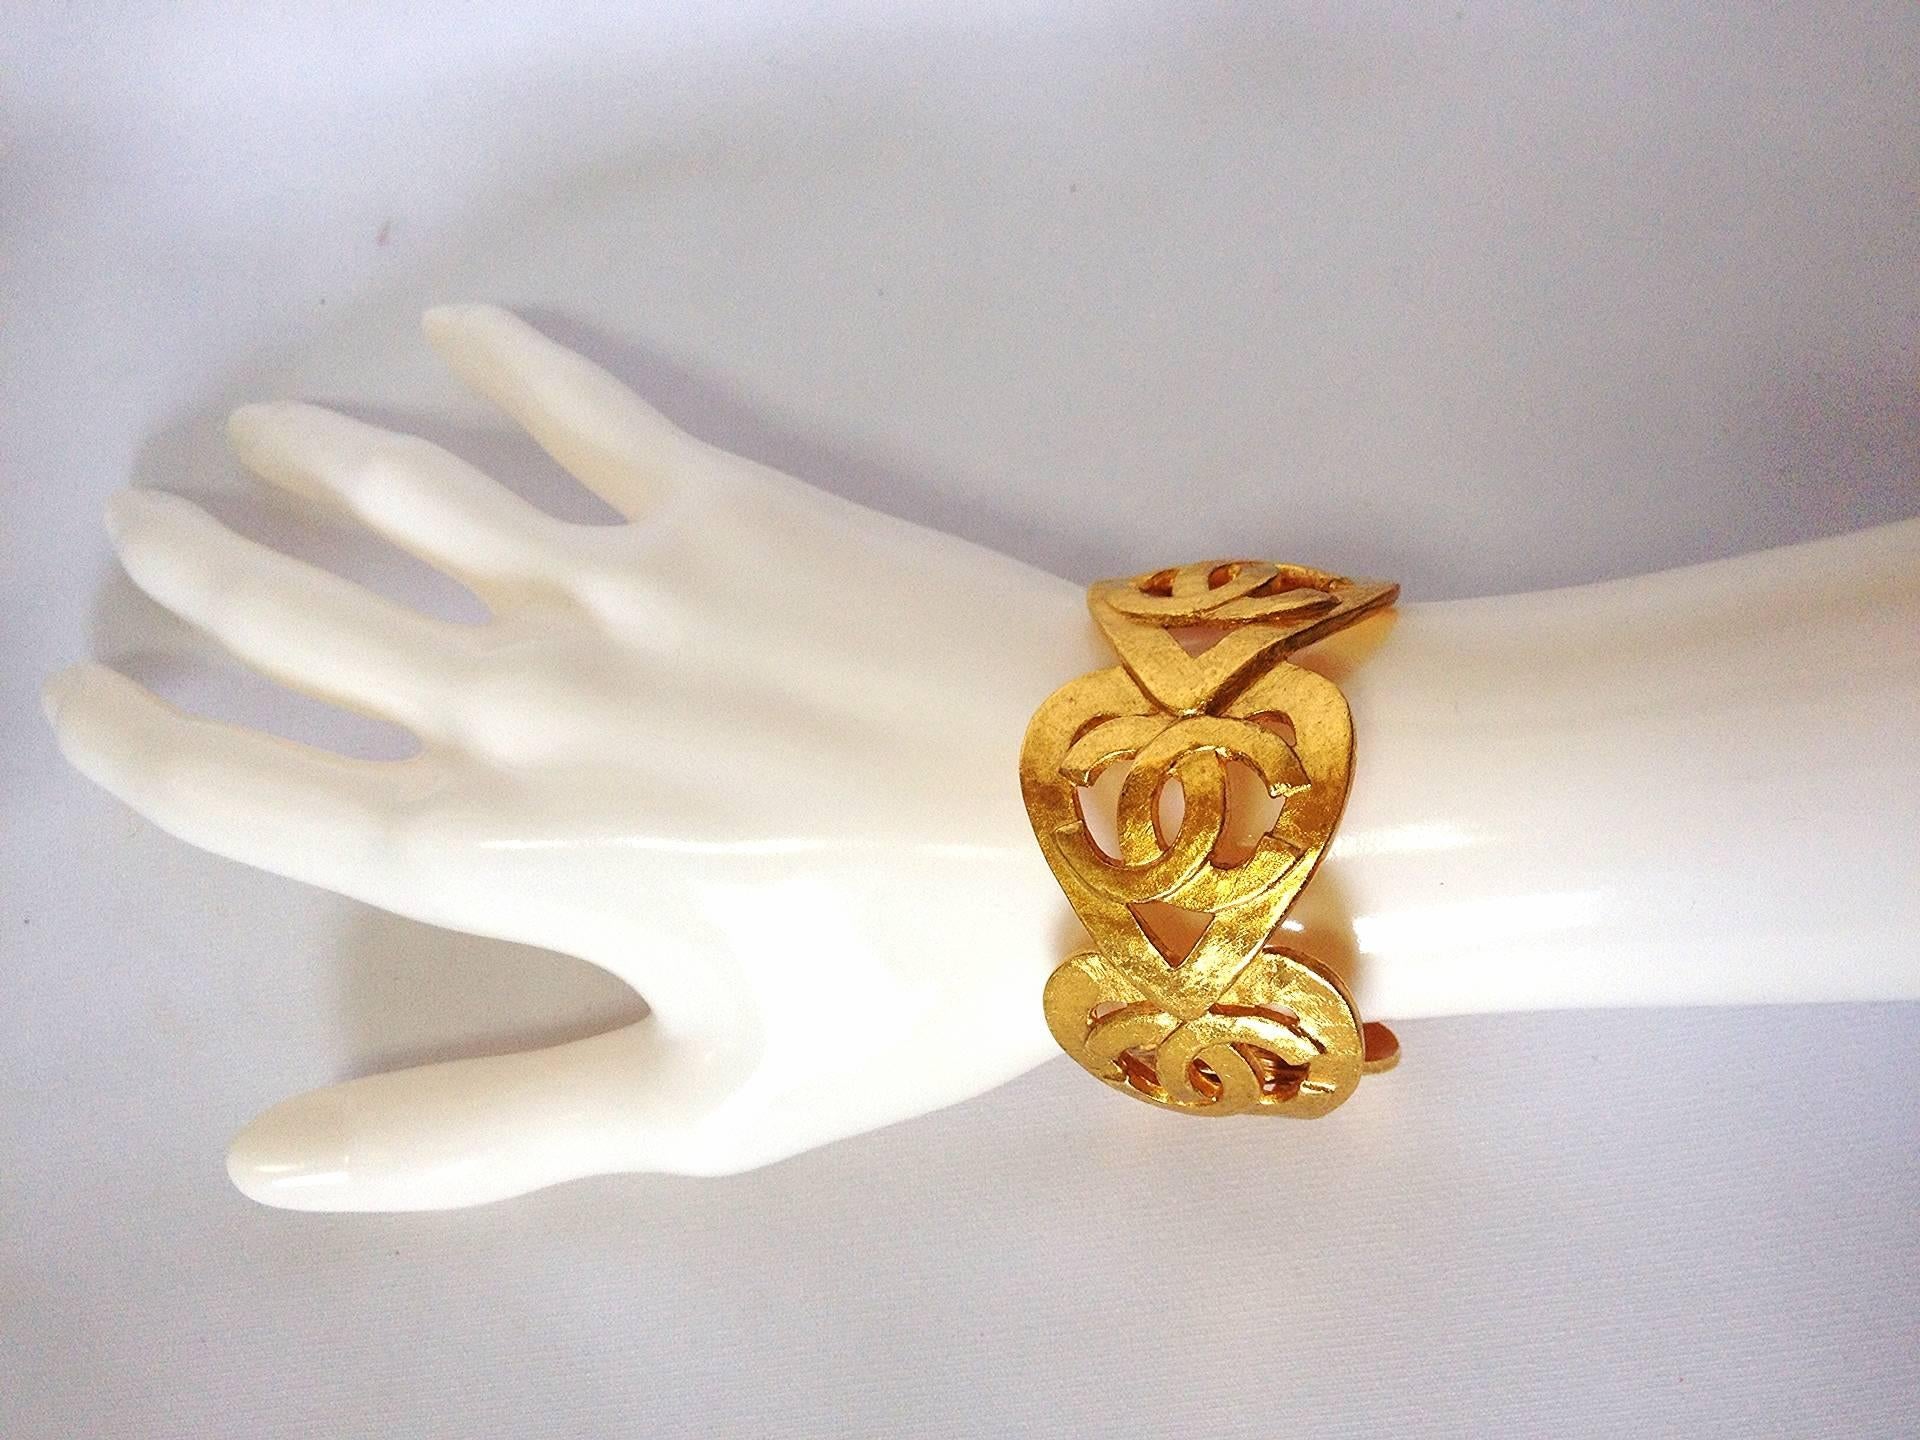 1995 Vintage CHANEL rare heart shape with CC mark rayred design bangle, bracelet. One of a kind jewelry piece.

Introducing another rare vintage jewelry masterpiece from CHANEL back in the 90's. 
Stamped 95.
If you are a vintage CHANEL lover or